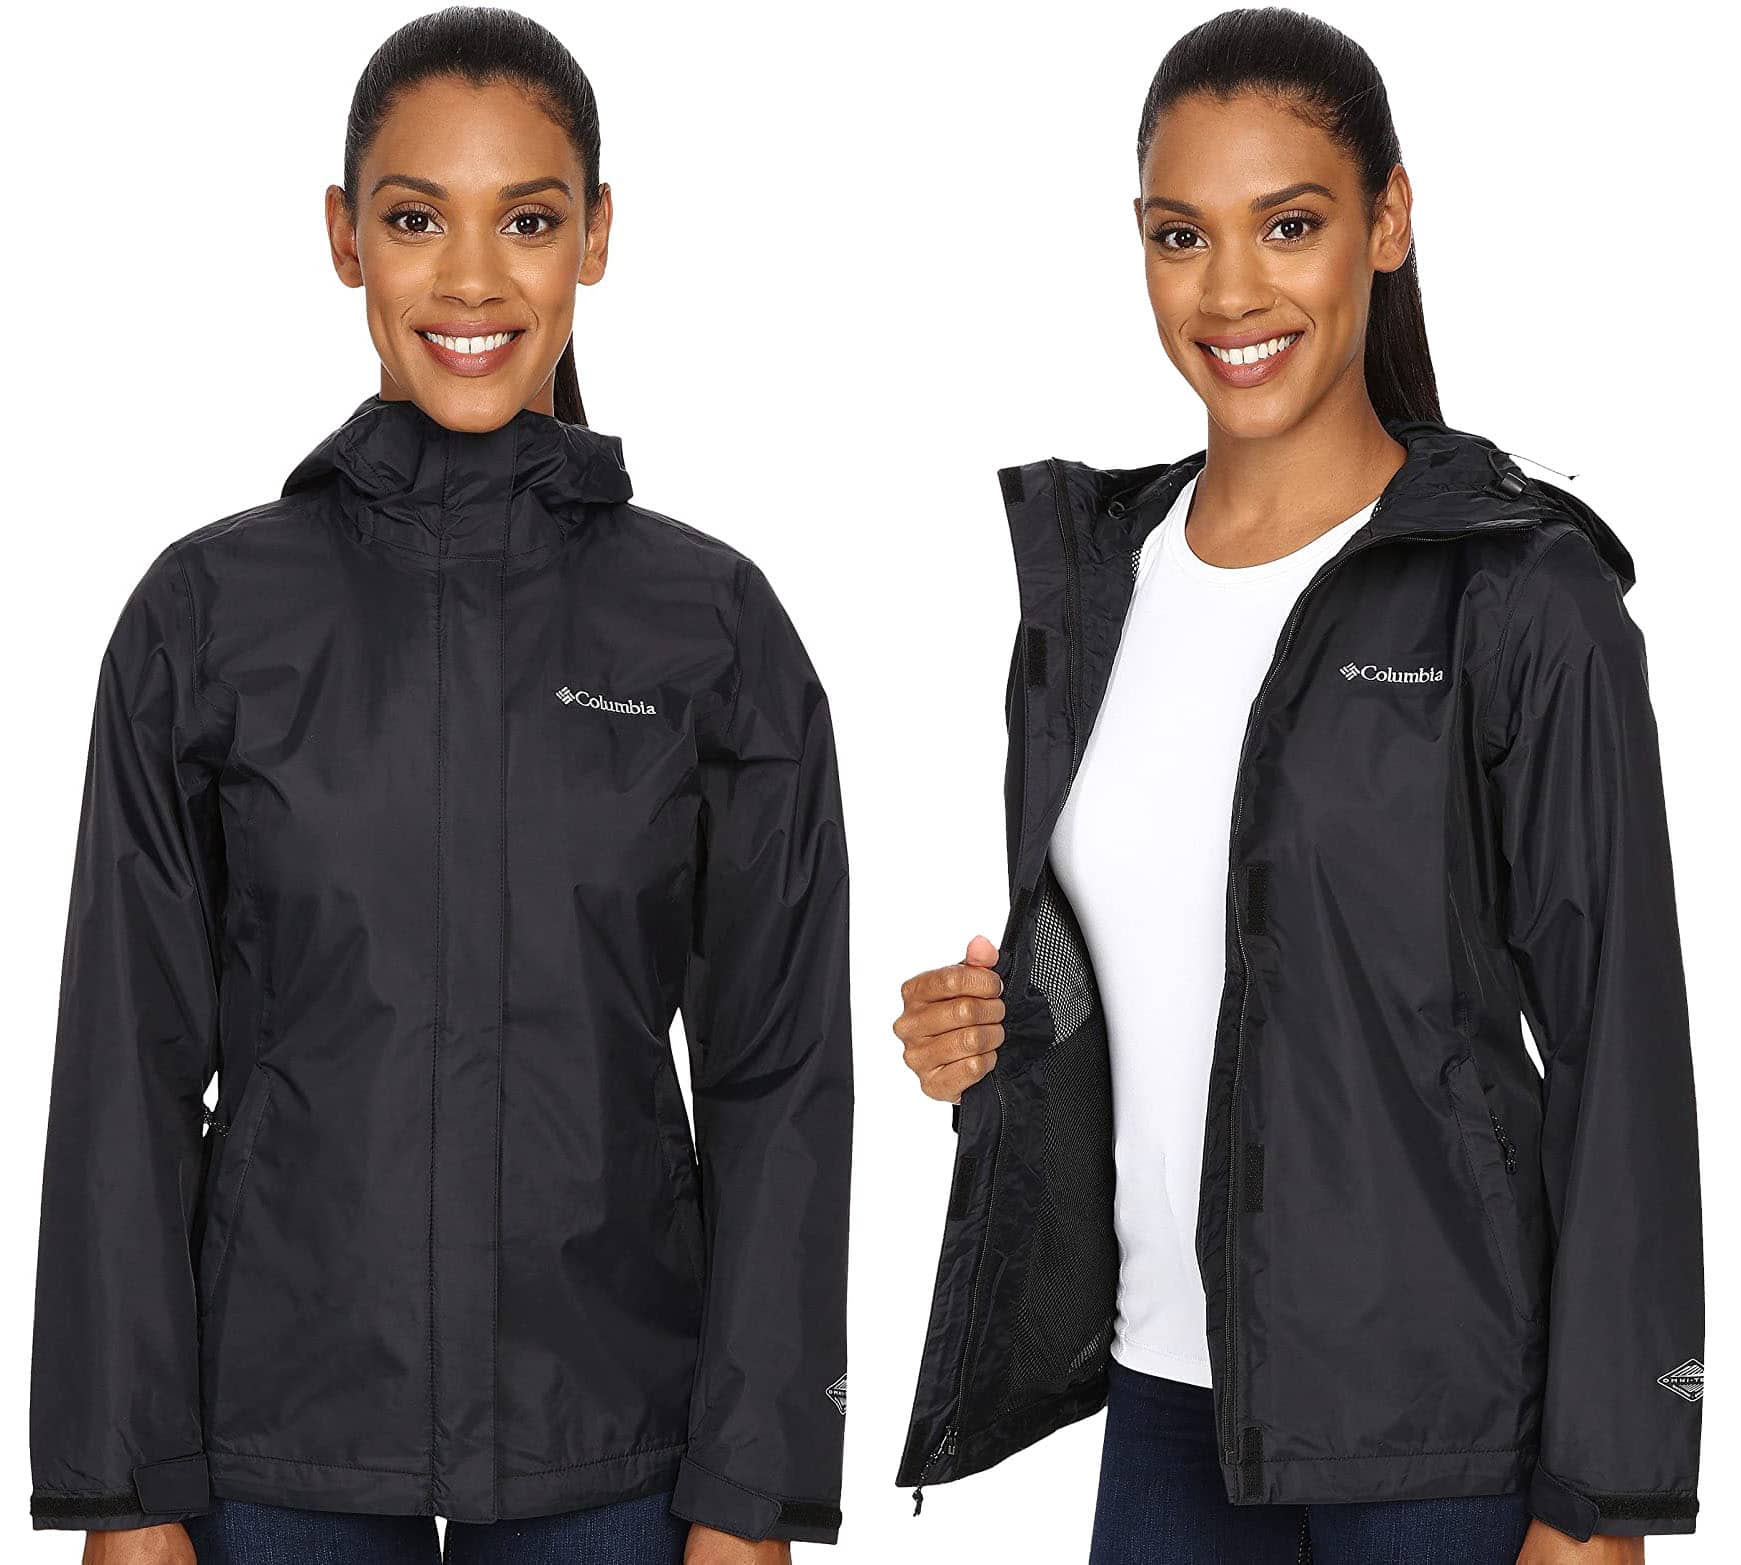 Columbia’s ultralightweight Arcadia II rain jacket features a seam-sealed construction with soft mesh lining